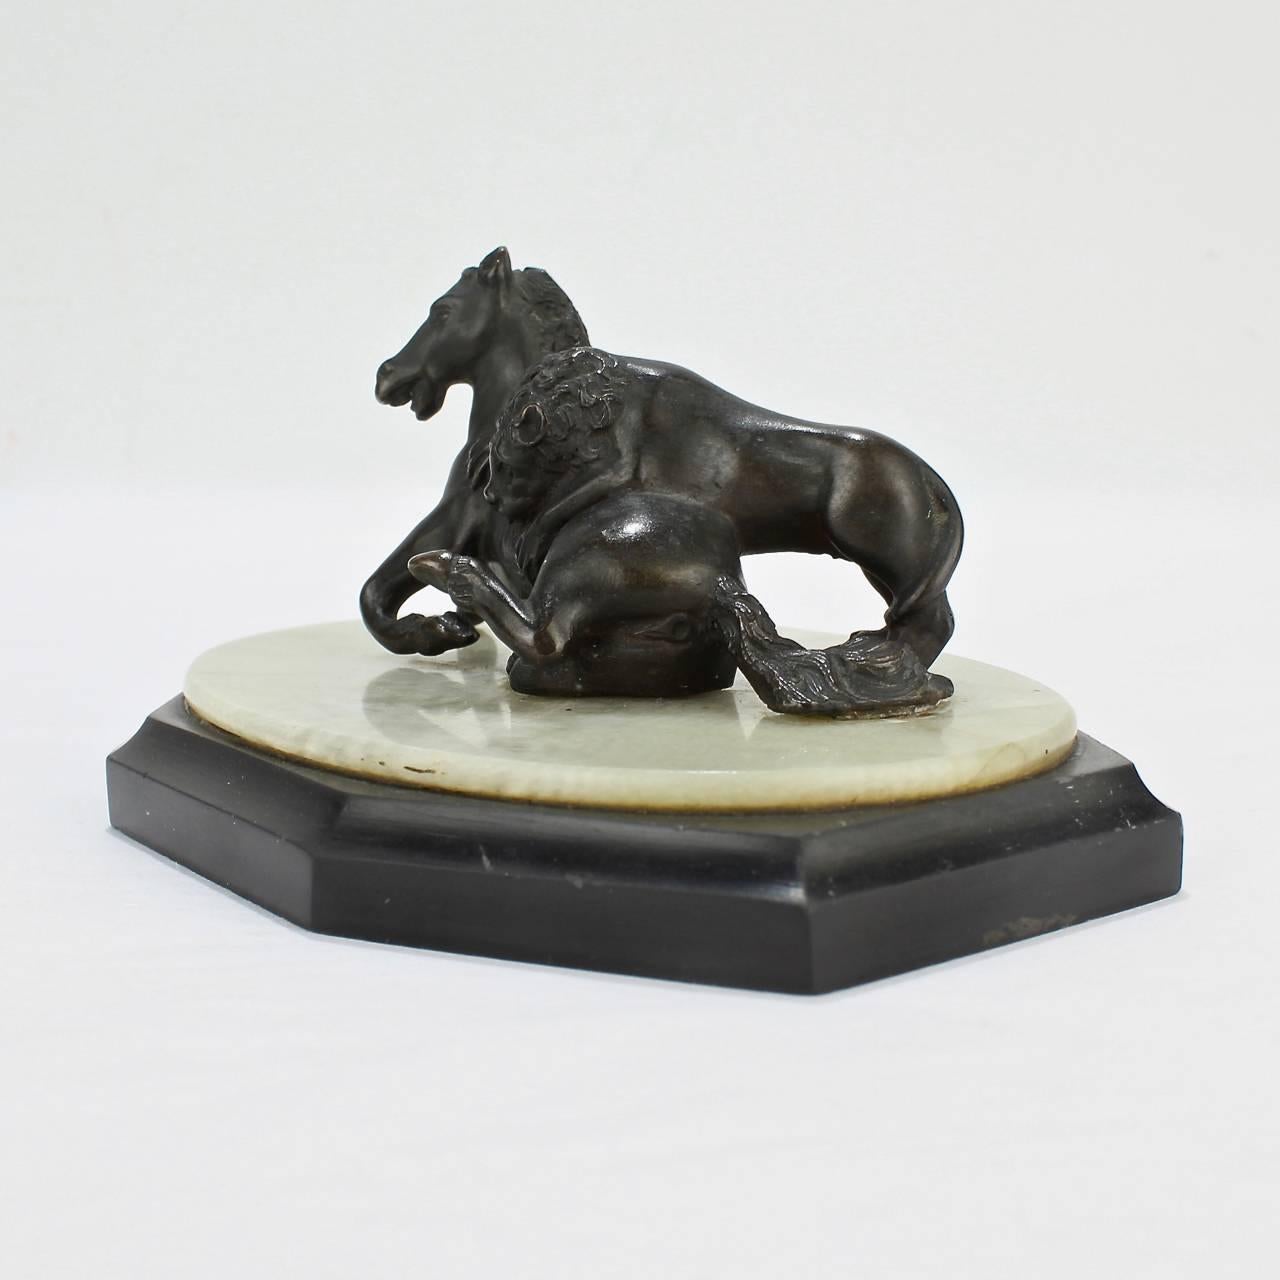 A fine 19th century Grand Tour miniature model of the Lion Attacking a Horse sculpture.

Modeled after the ancient Roman version found on Capitoline Hill.

Sized as a paperweight for the desk or perfect for shelf nestled amongst leather books